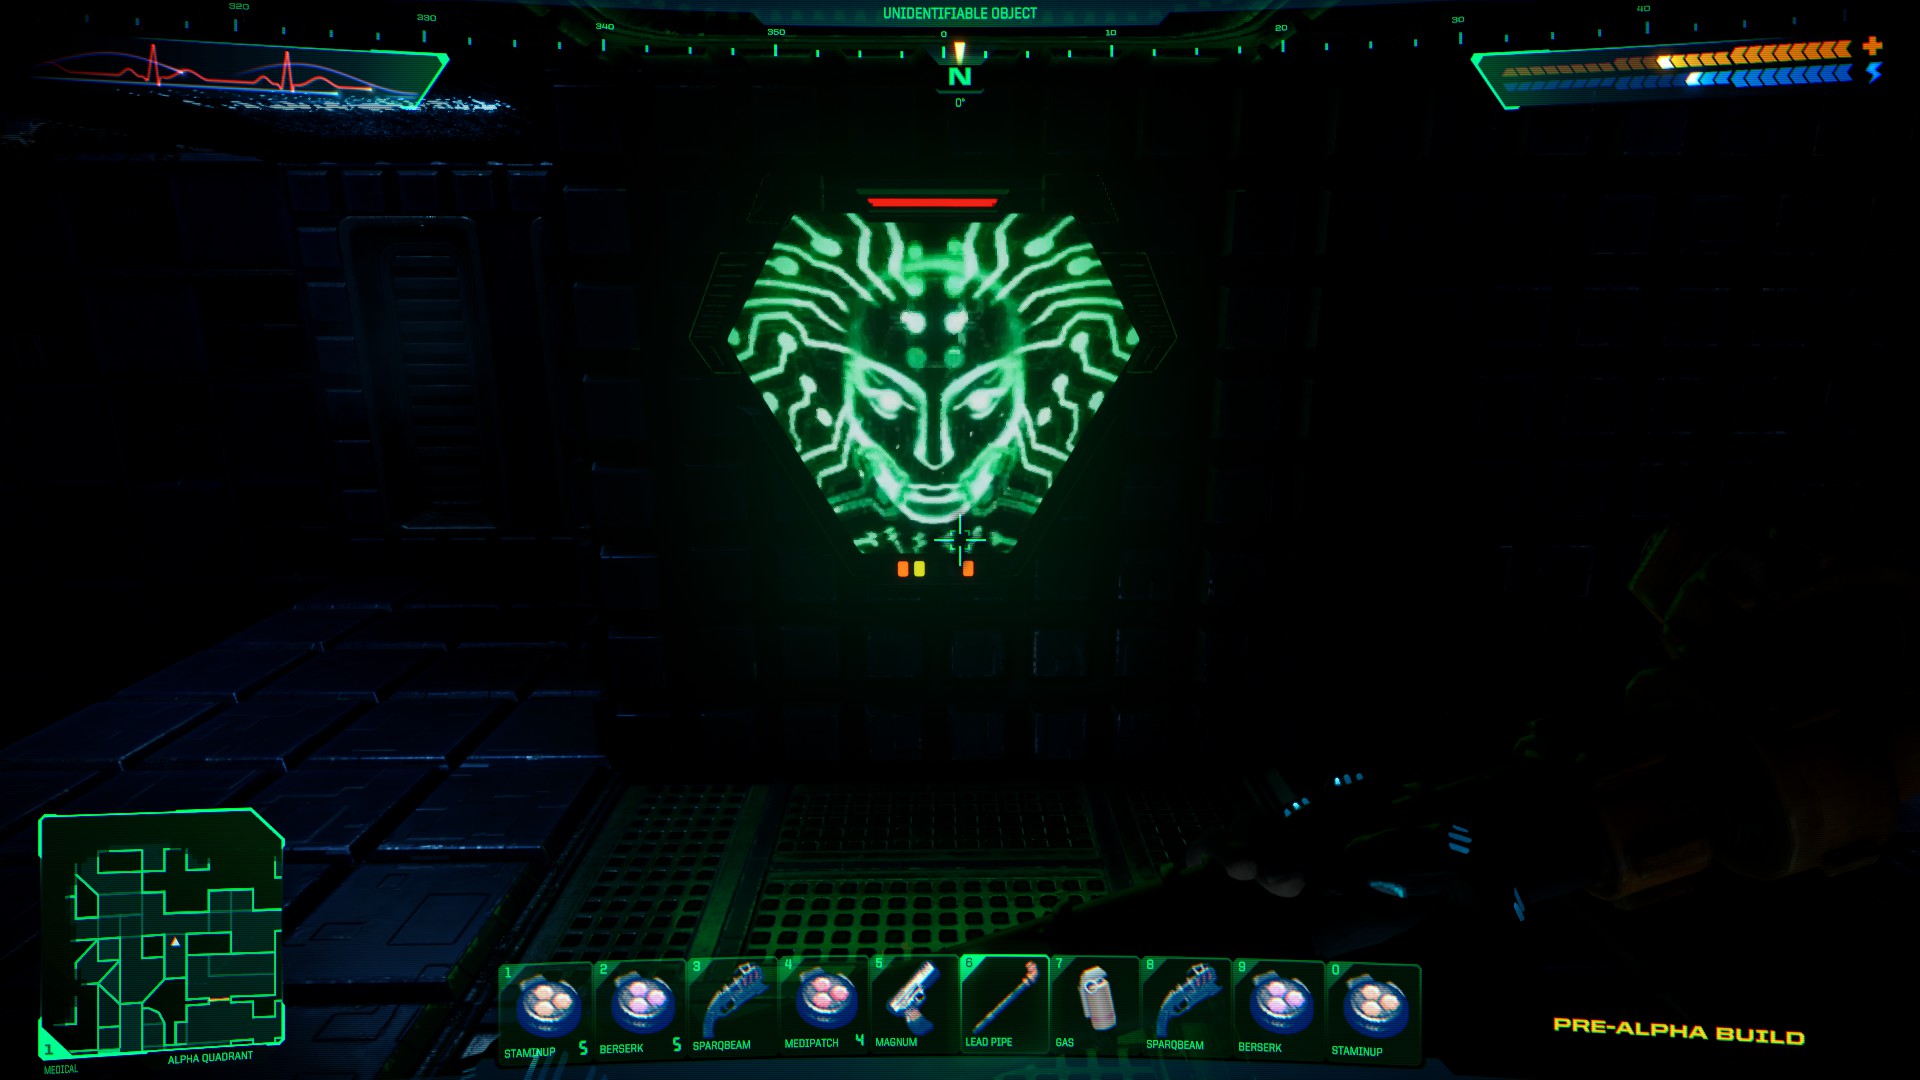 will there be a system shock remake